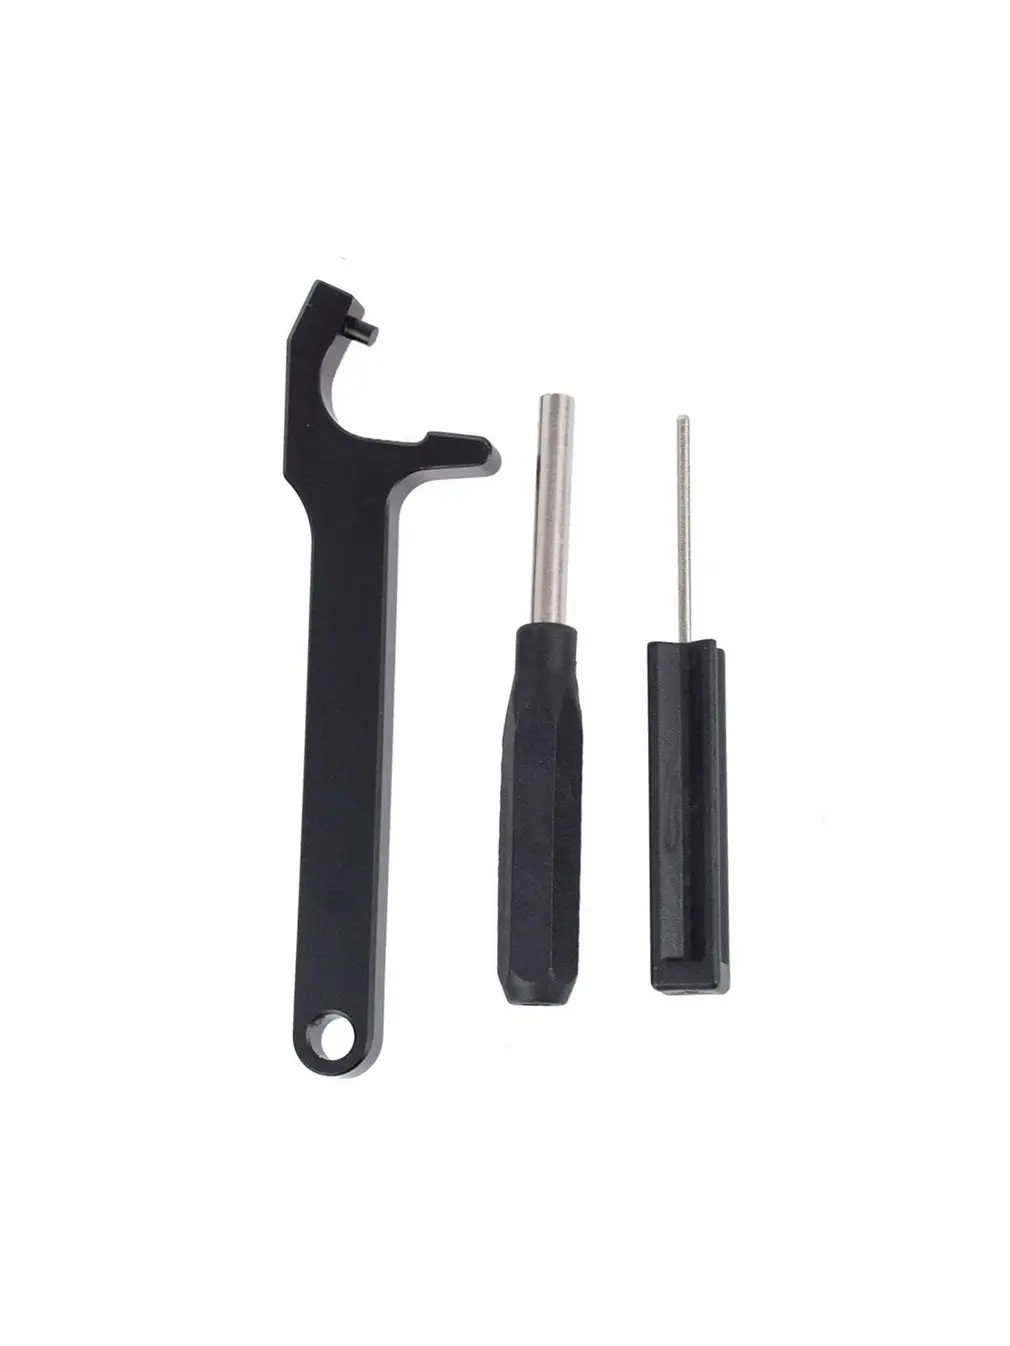 Disassembly Hex Pin Punch Tool Front Sight Tools Magazine For Glock 19 17 26 43 